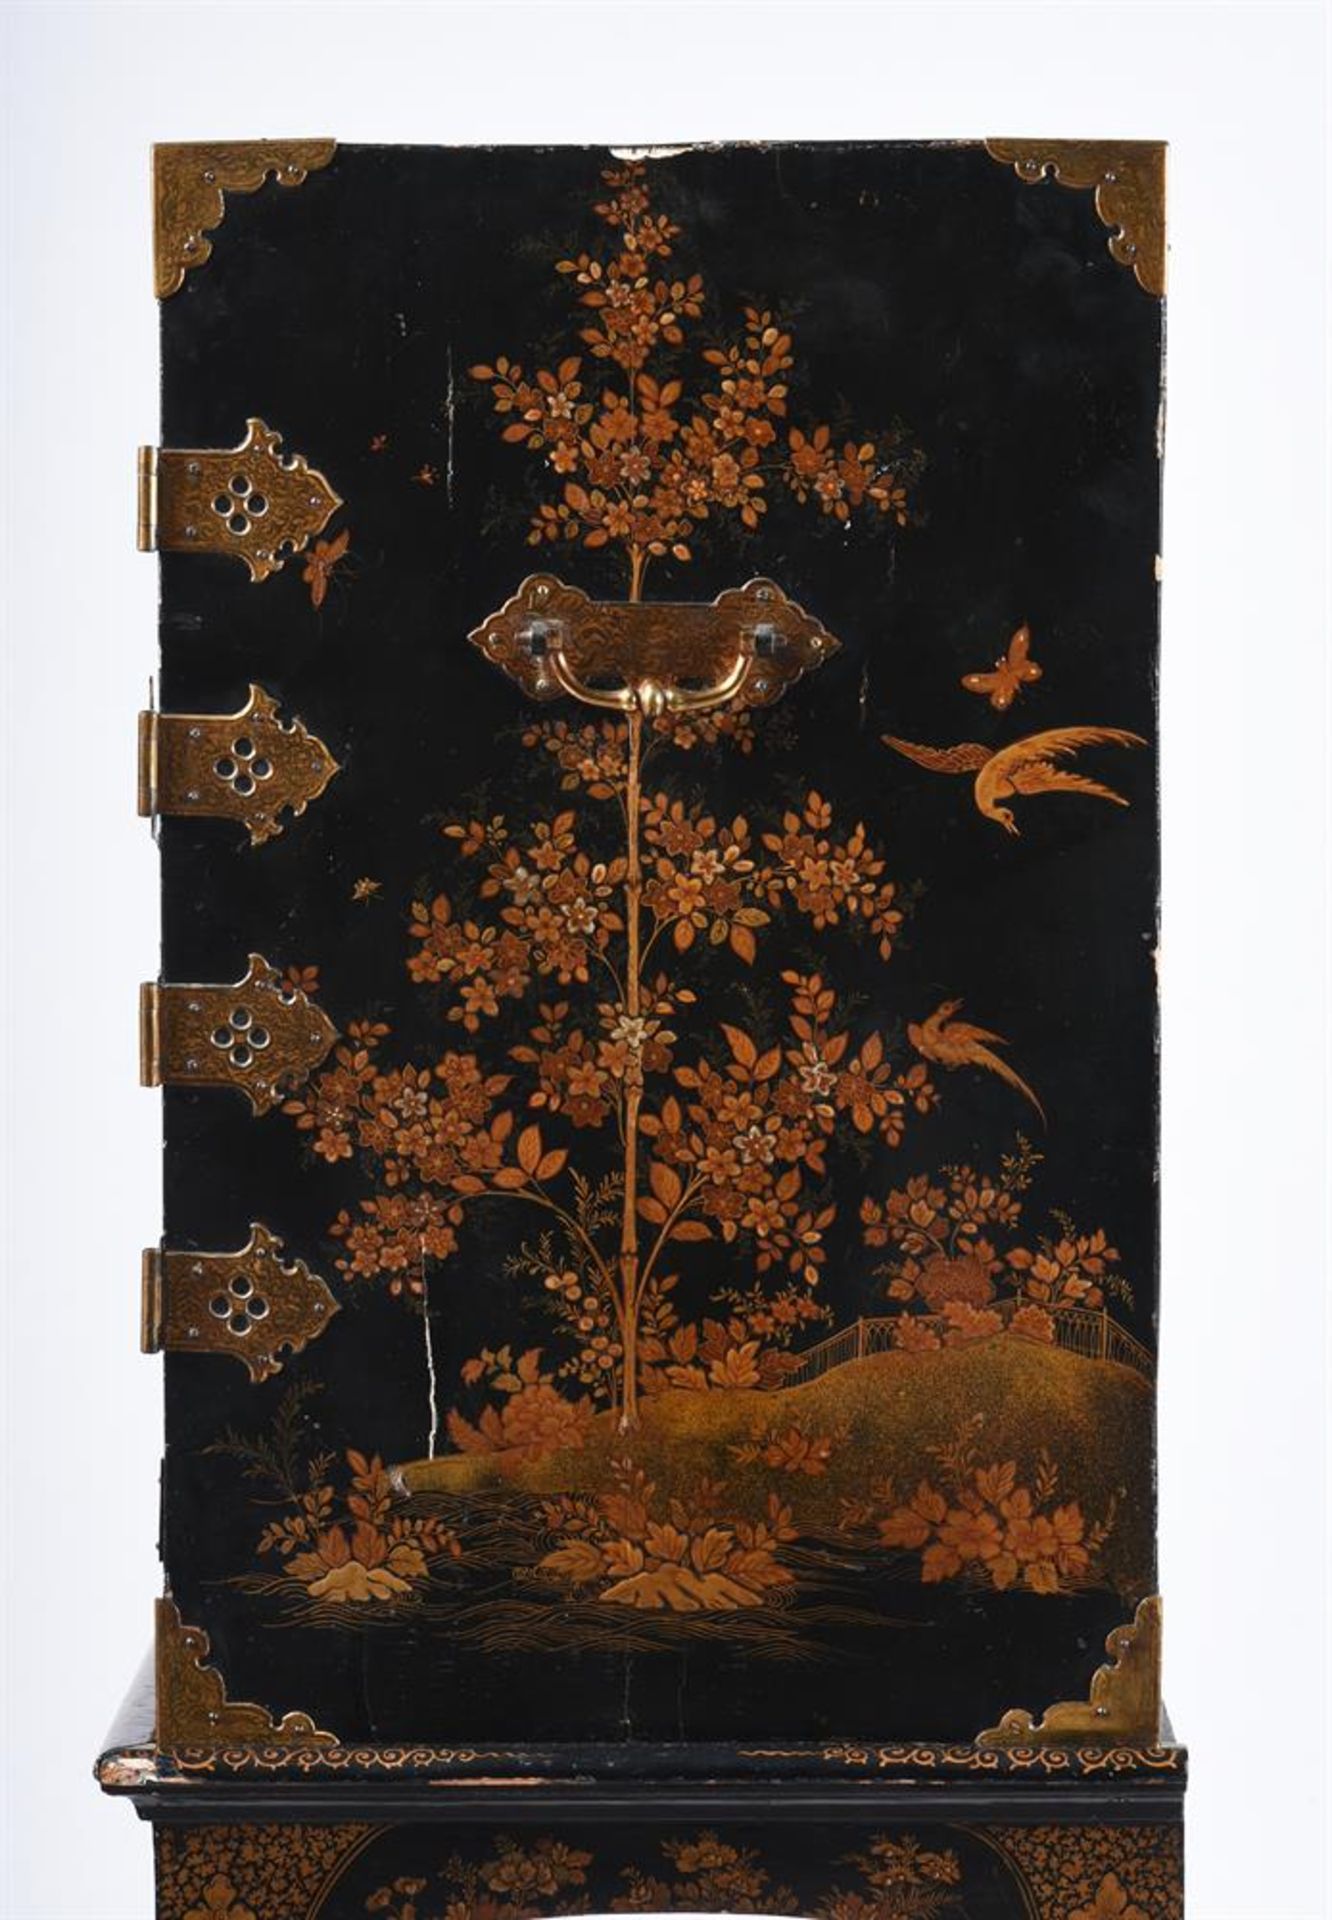 A BLACK LACQUER AND GILT CHINOISERIE DECORATED CABINET ON STAND, 18TH CENTURY - Image 4 of 7